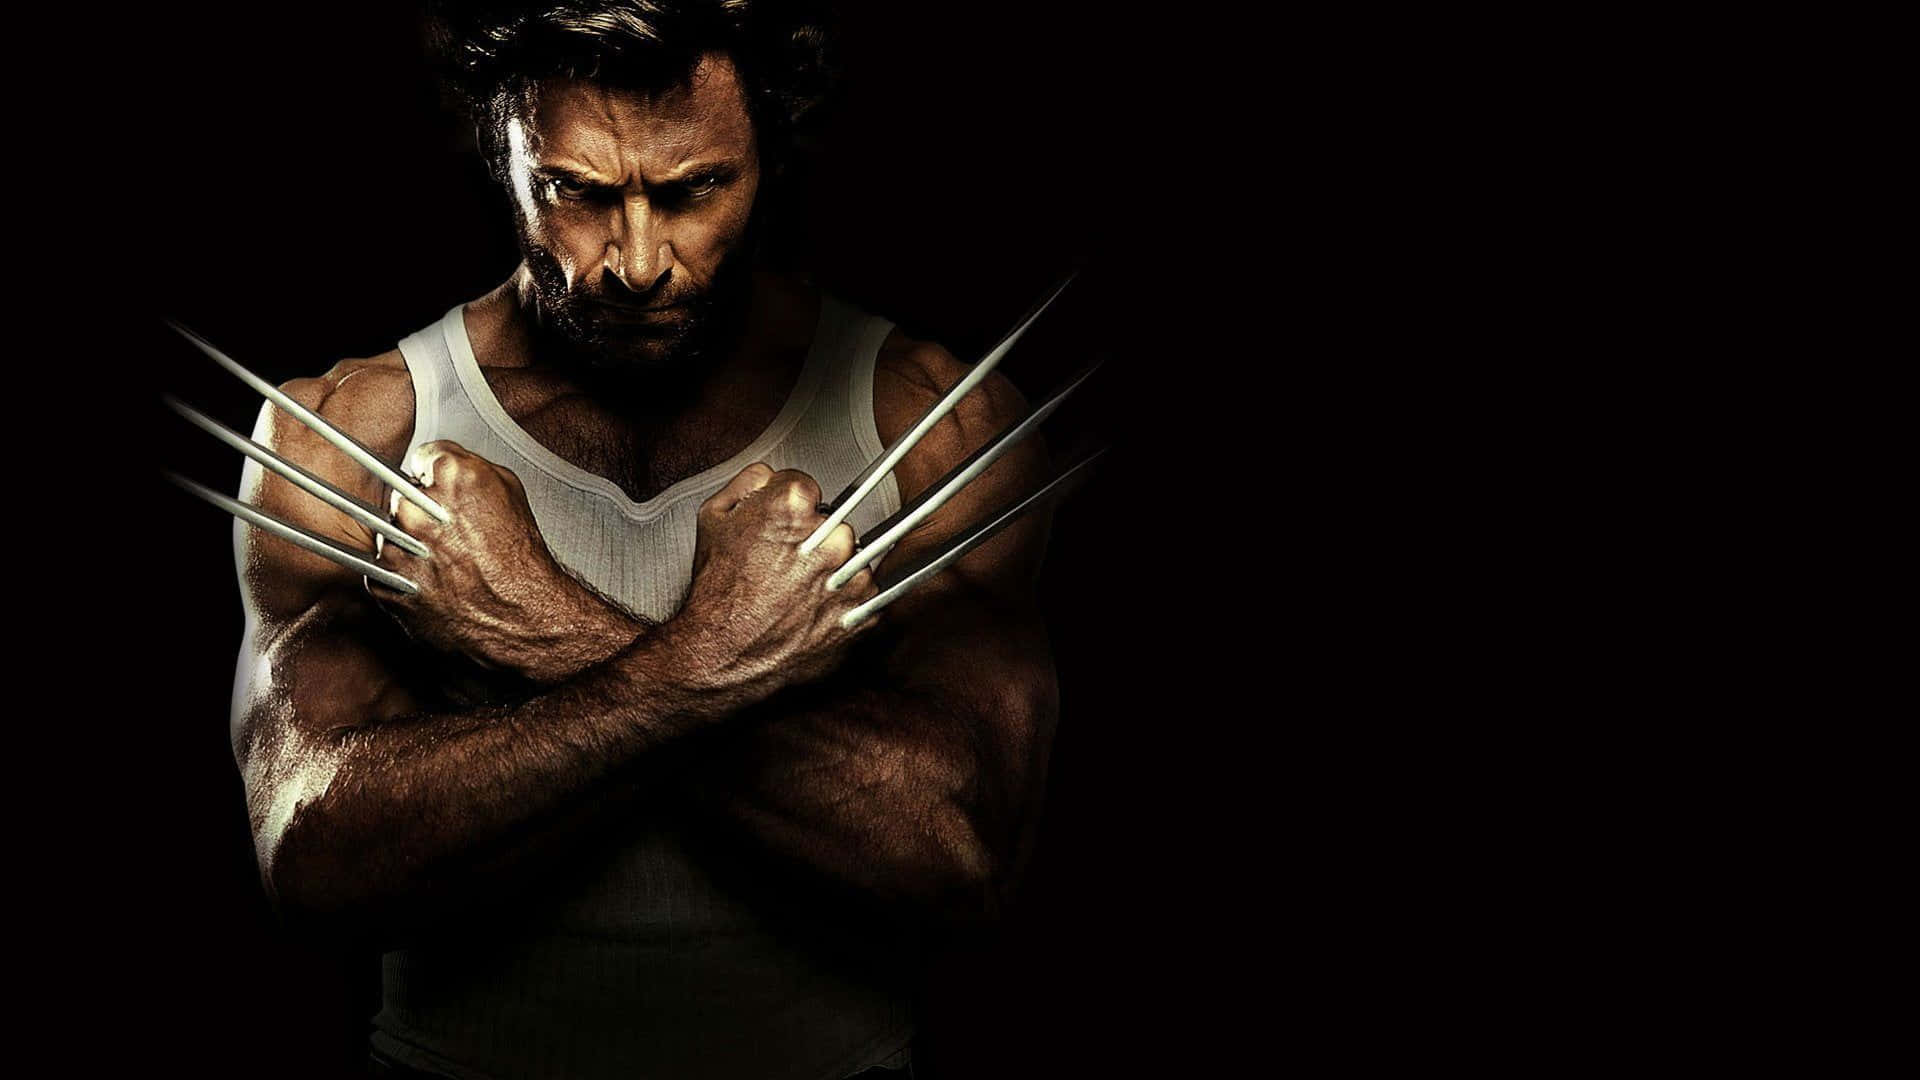 Wolverine emerging from the shadows